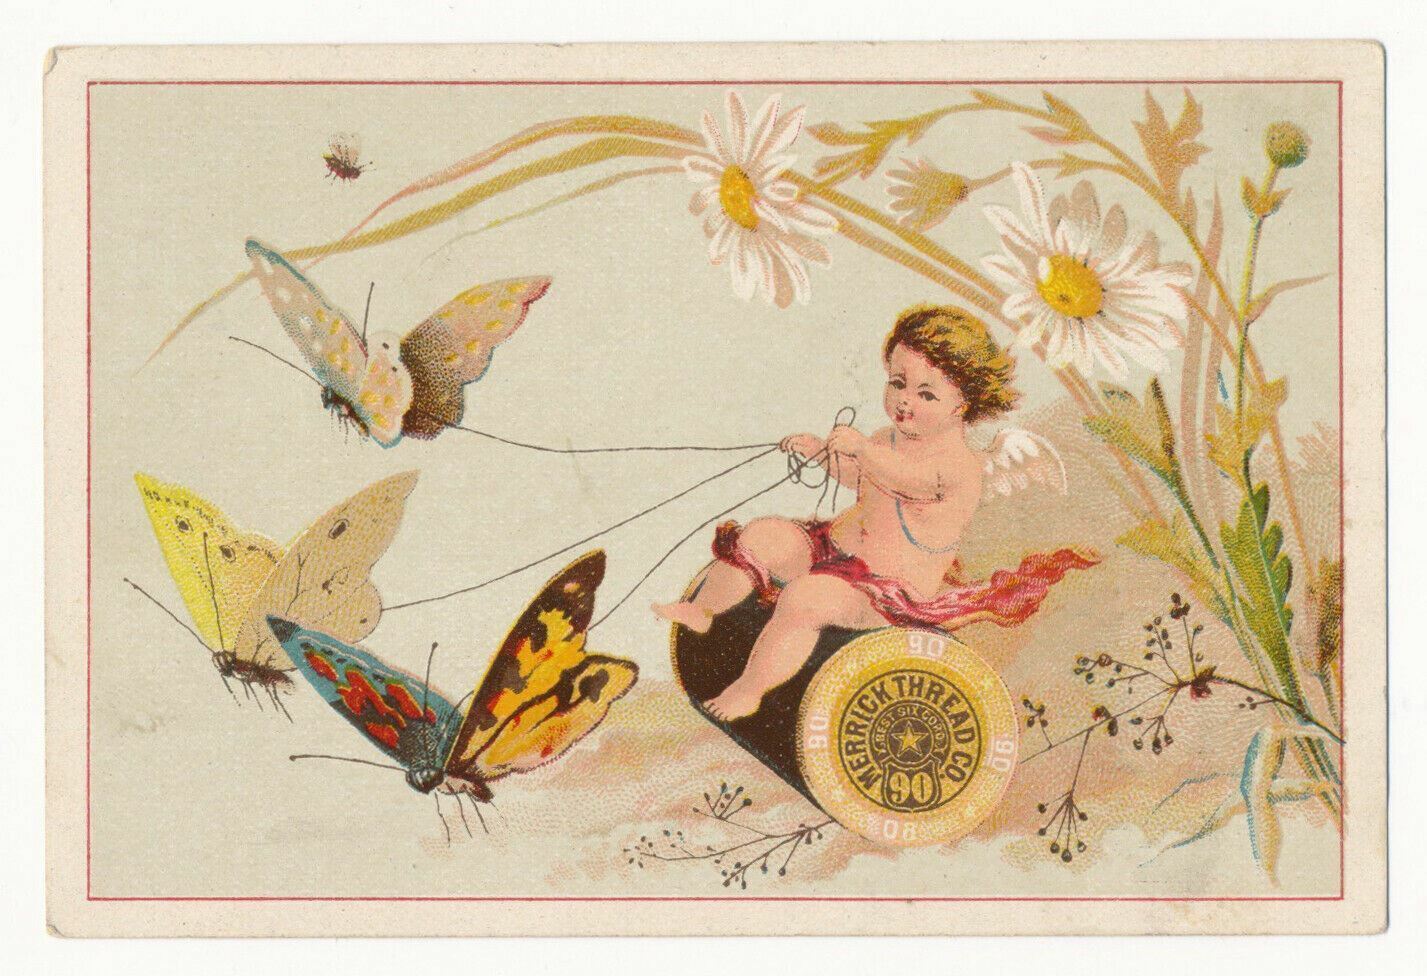 Butterflies Pulling a Baby on a Chariot - Fantasy Victorian Trade Card ca.1870\'s